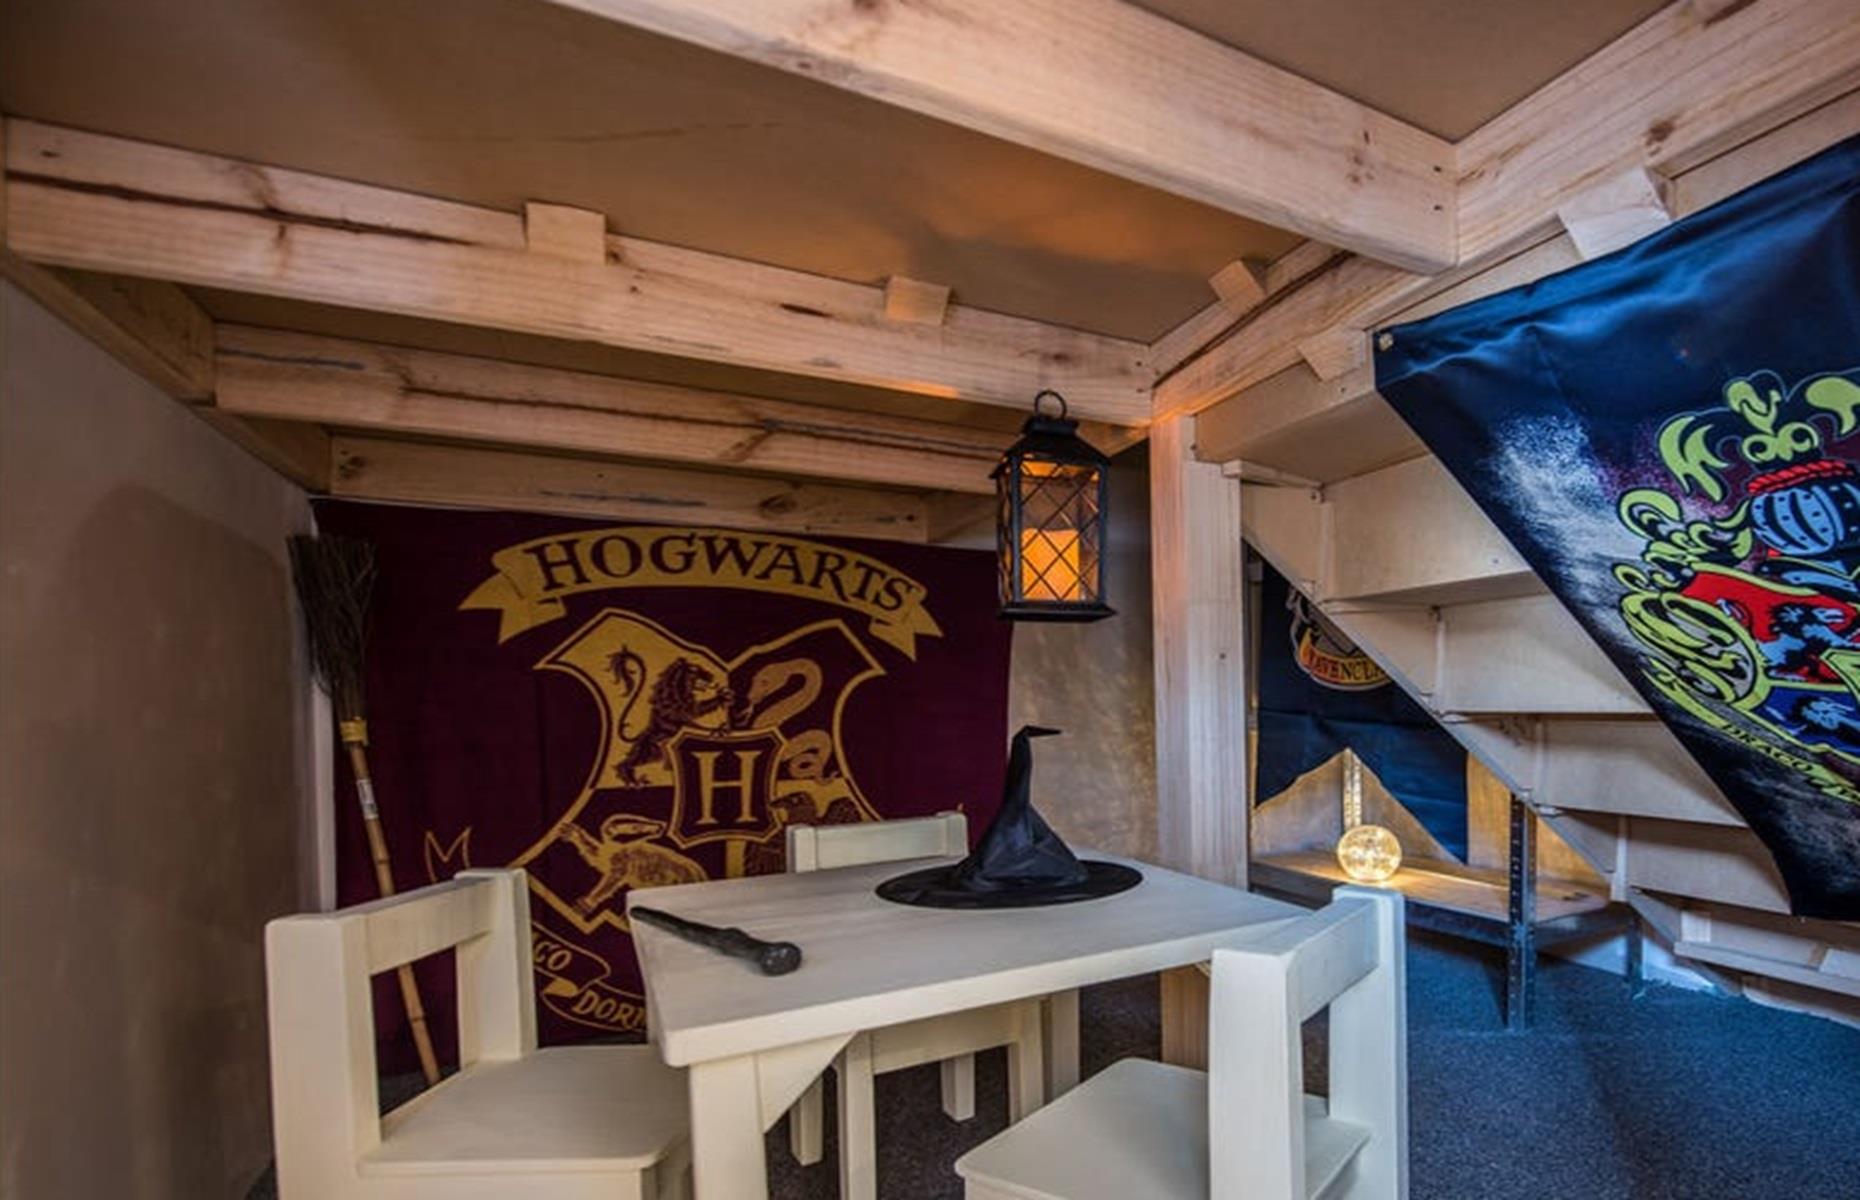 <p>That's right, the former owners of this pad decided to turn the redundant void below their stairs into the ultimate Hogwarts-themed retreat. Complete with a wand, wizard's hat, broom, fortune teller's orb, and lantern, the space is cozy, fun, and perfect for kids with bags of imagination.</p>